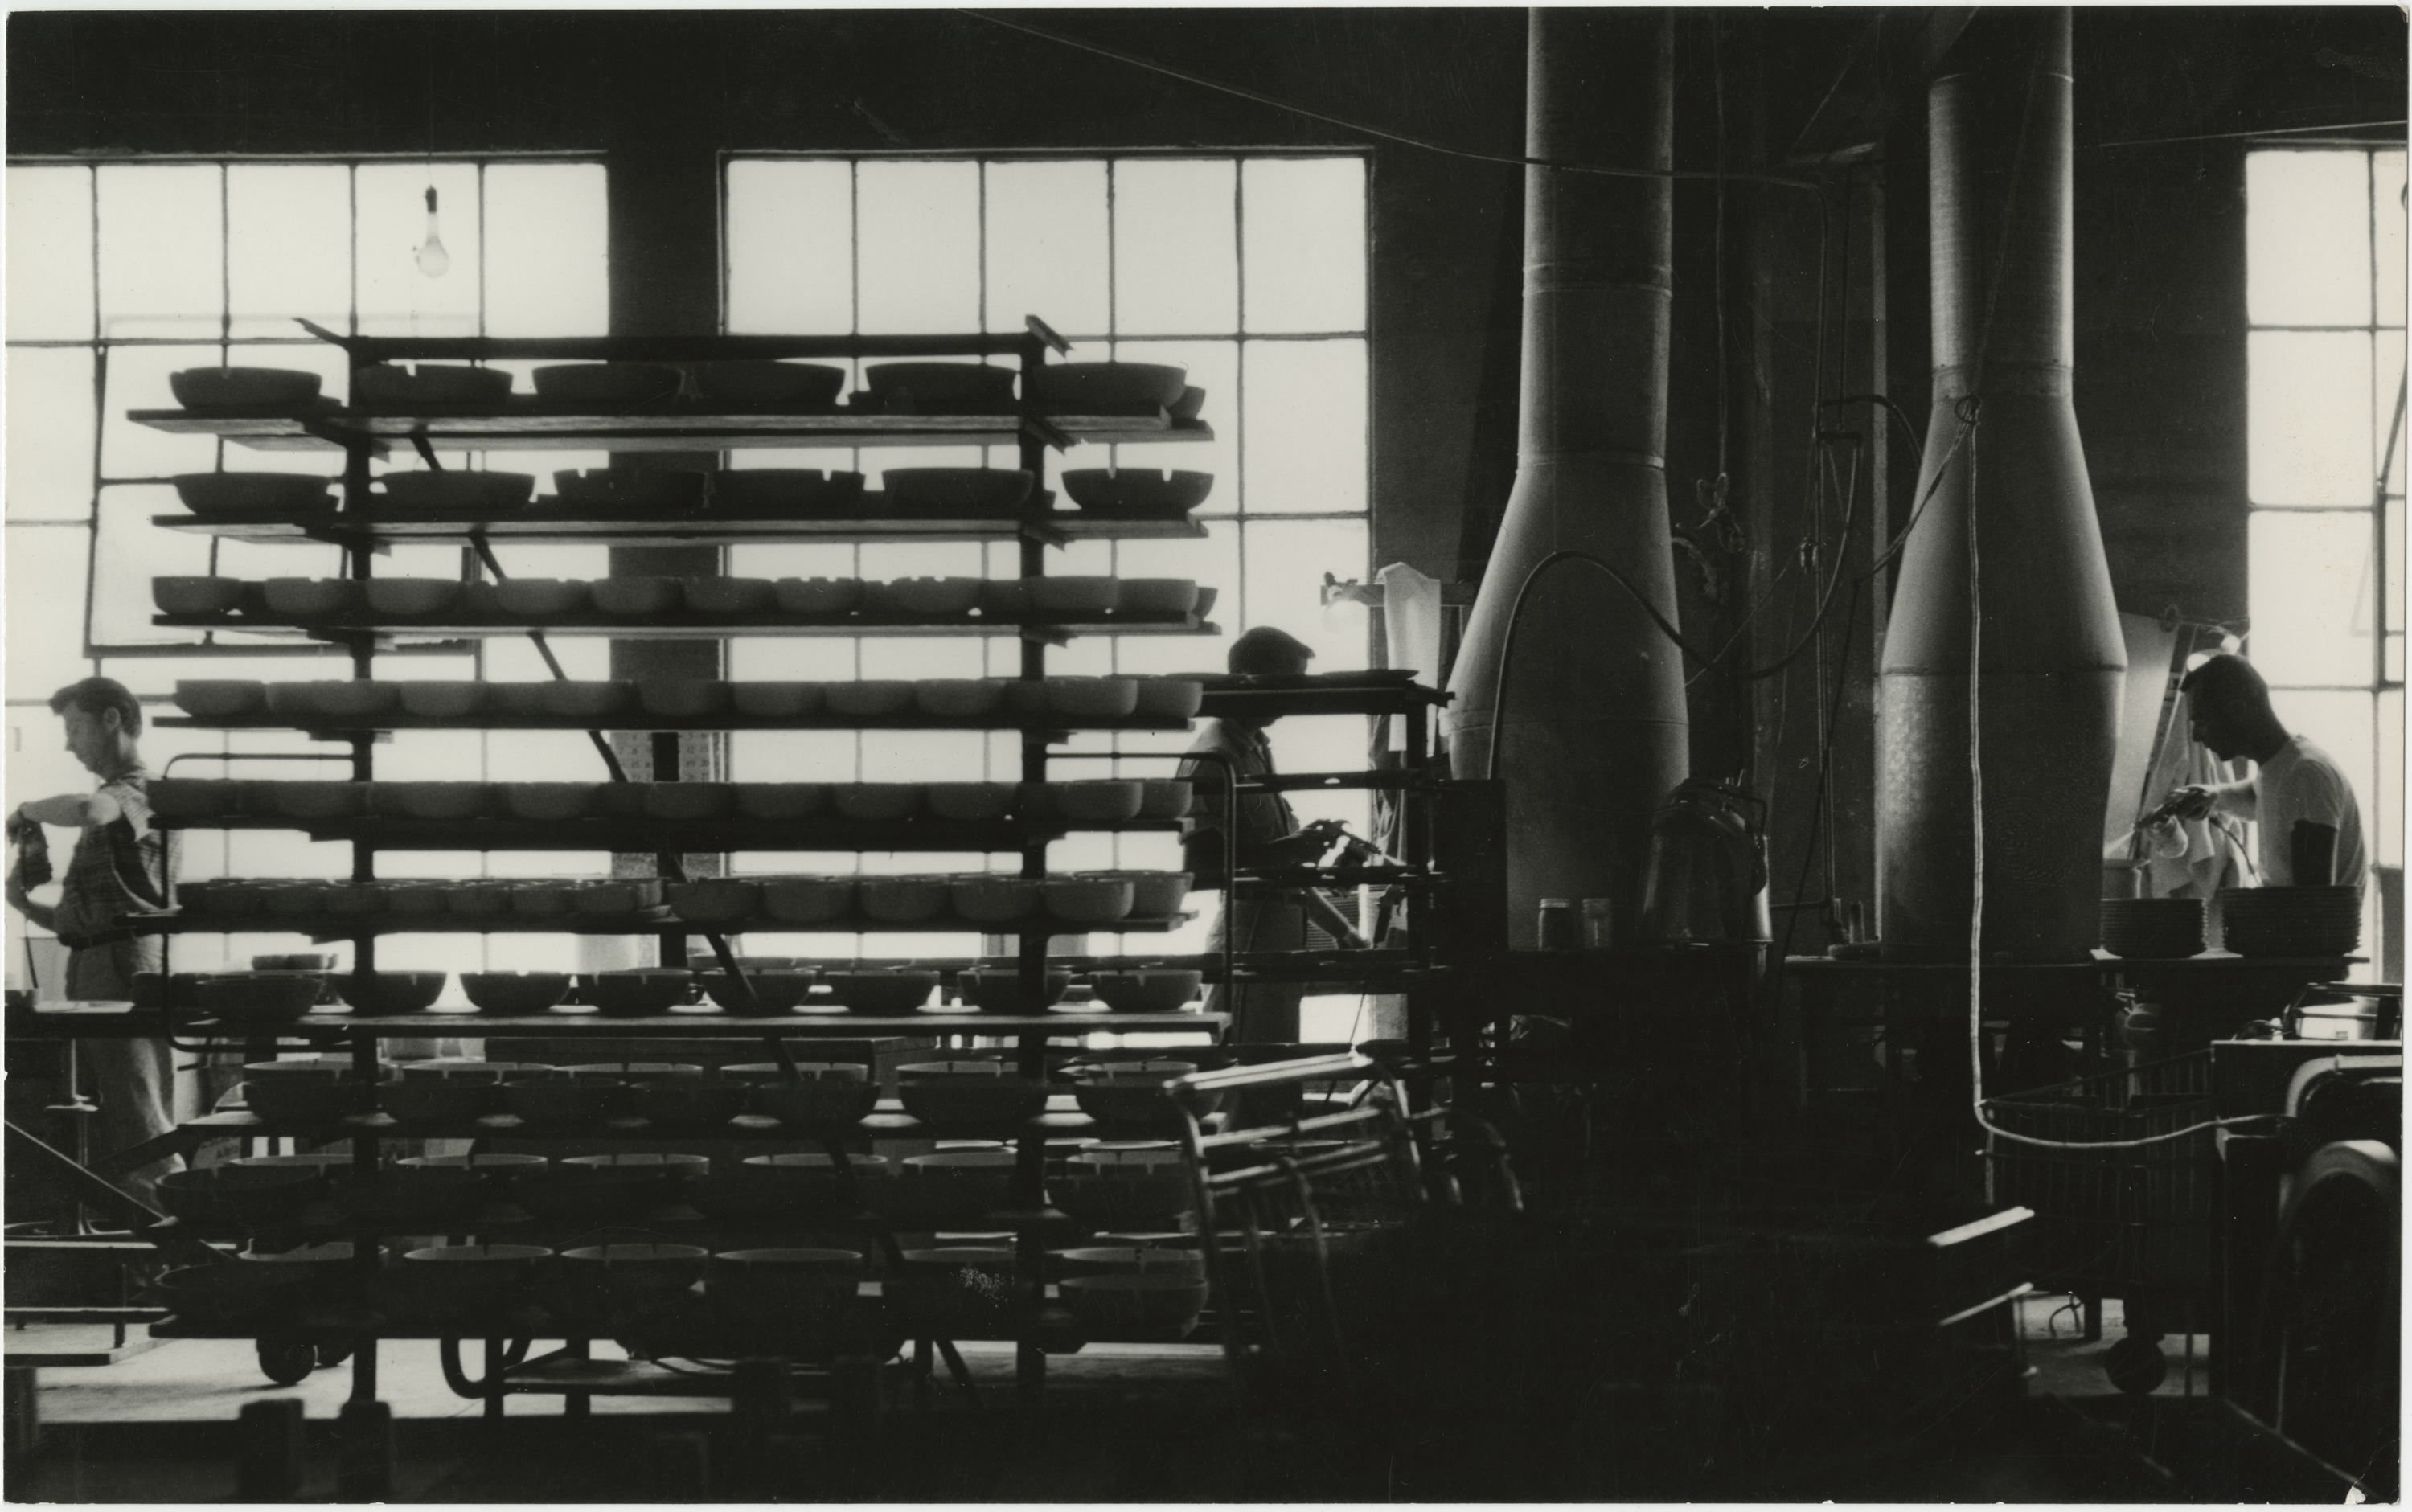 Black and white photo of men working in the background and Heath ashtrays on racks.